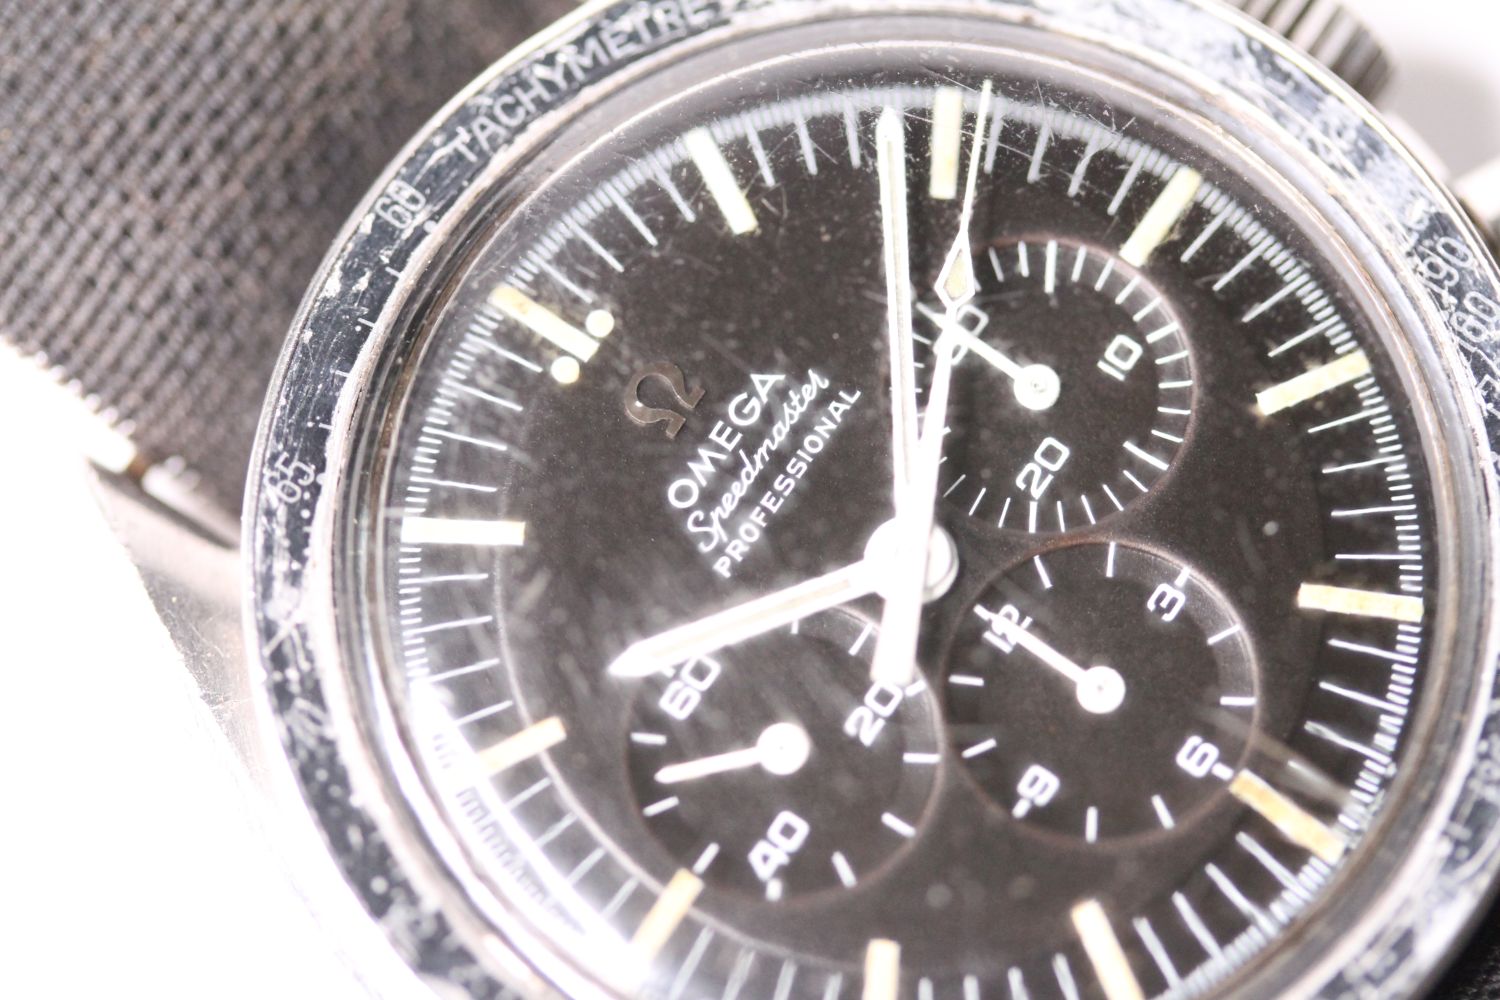 VINTAGE OMEGA SPEEDMASTER PROFESSIONAL 145.012 SP 1968, circular black dial with baton hour markers, - Image 3 of 9